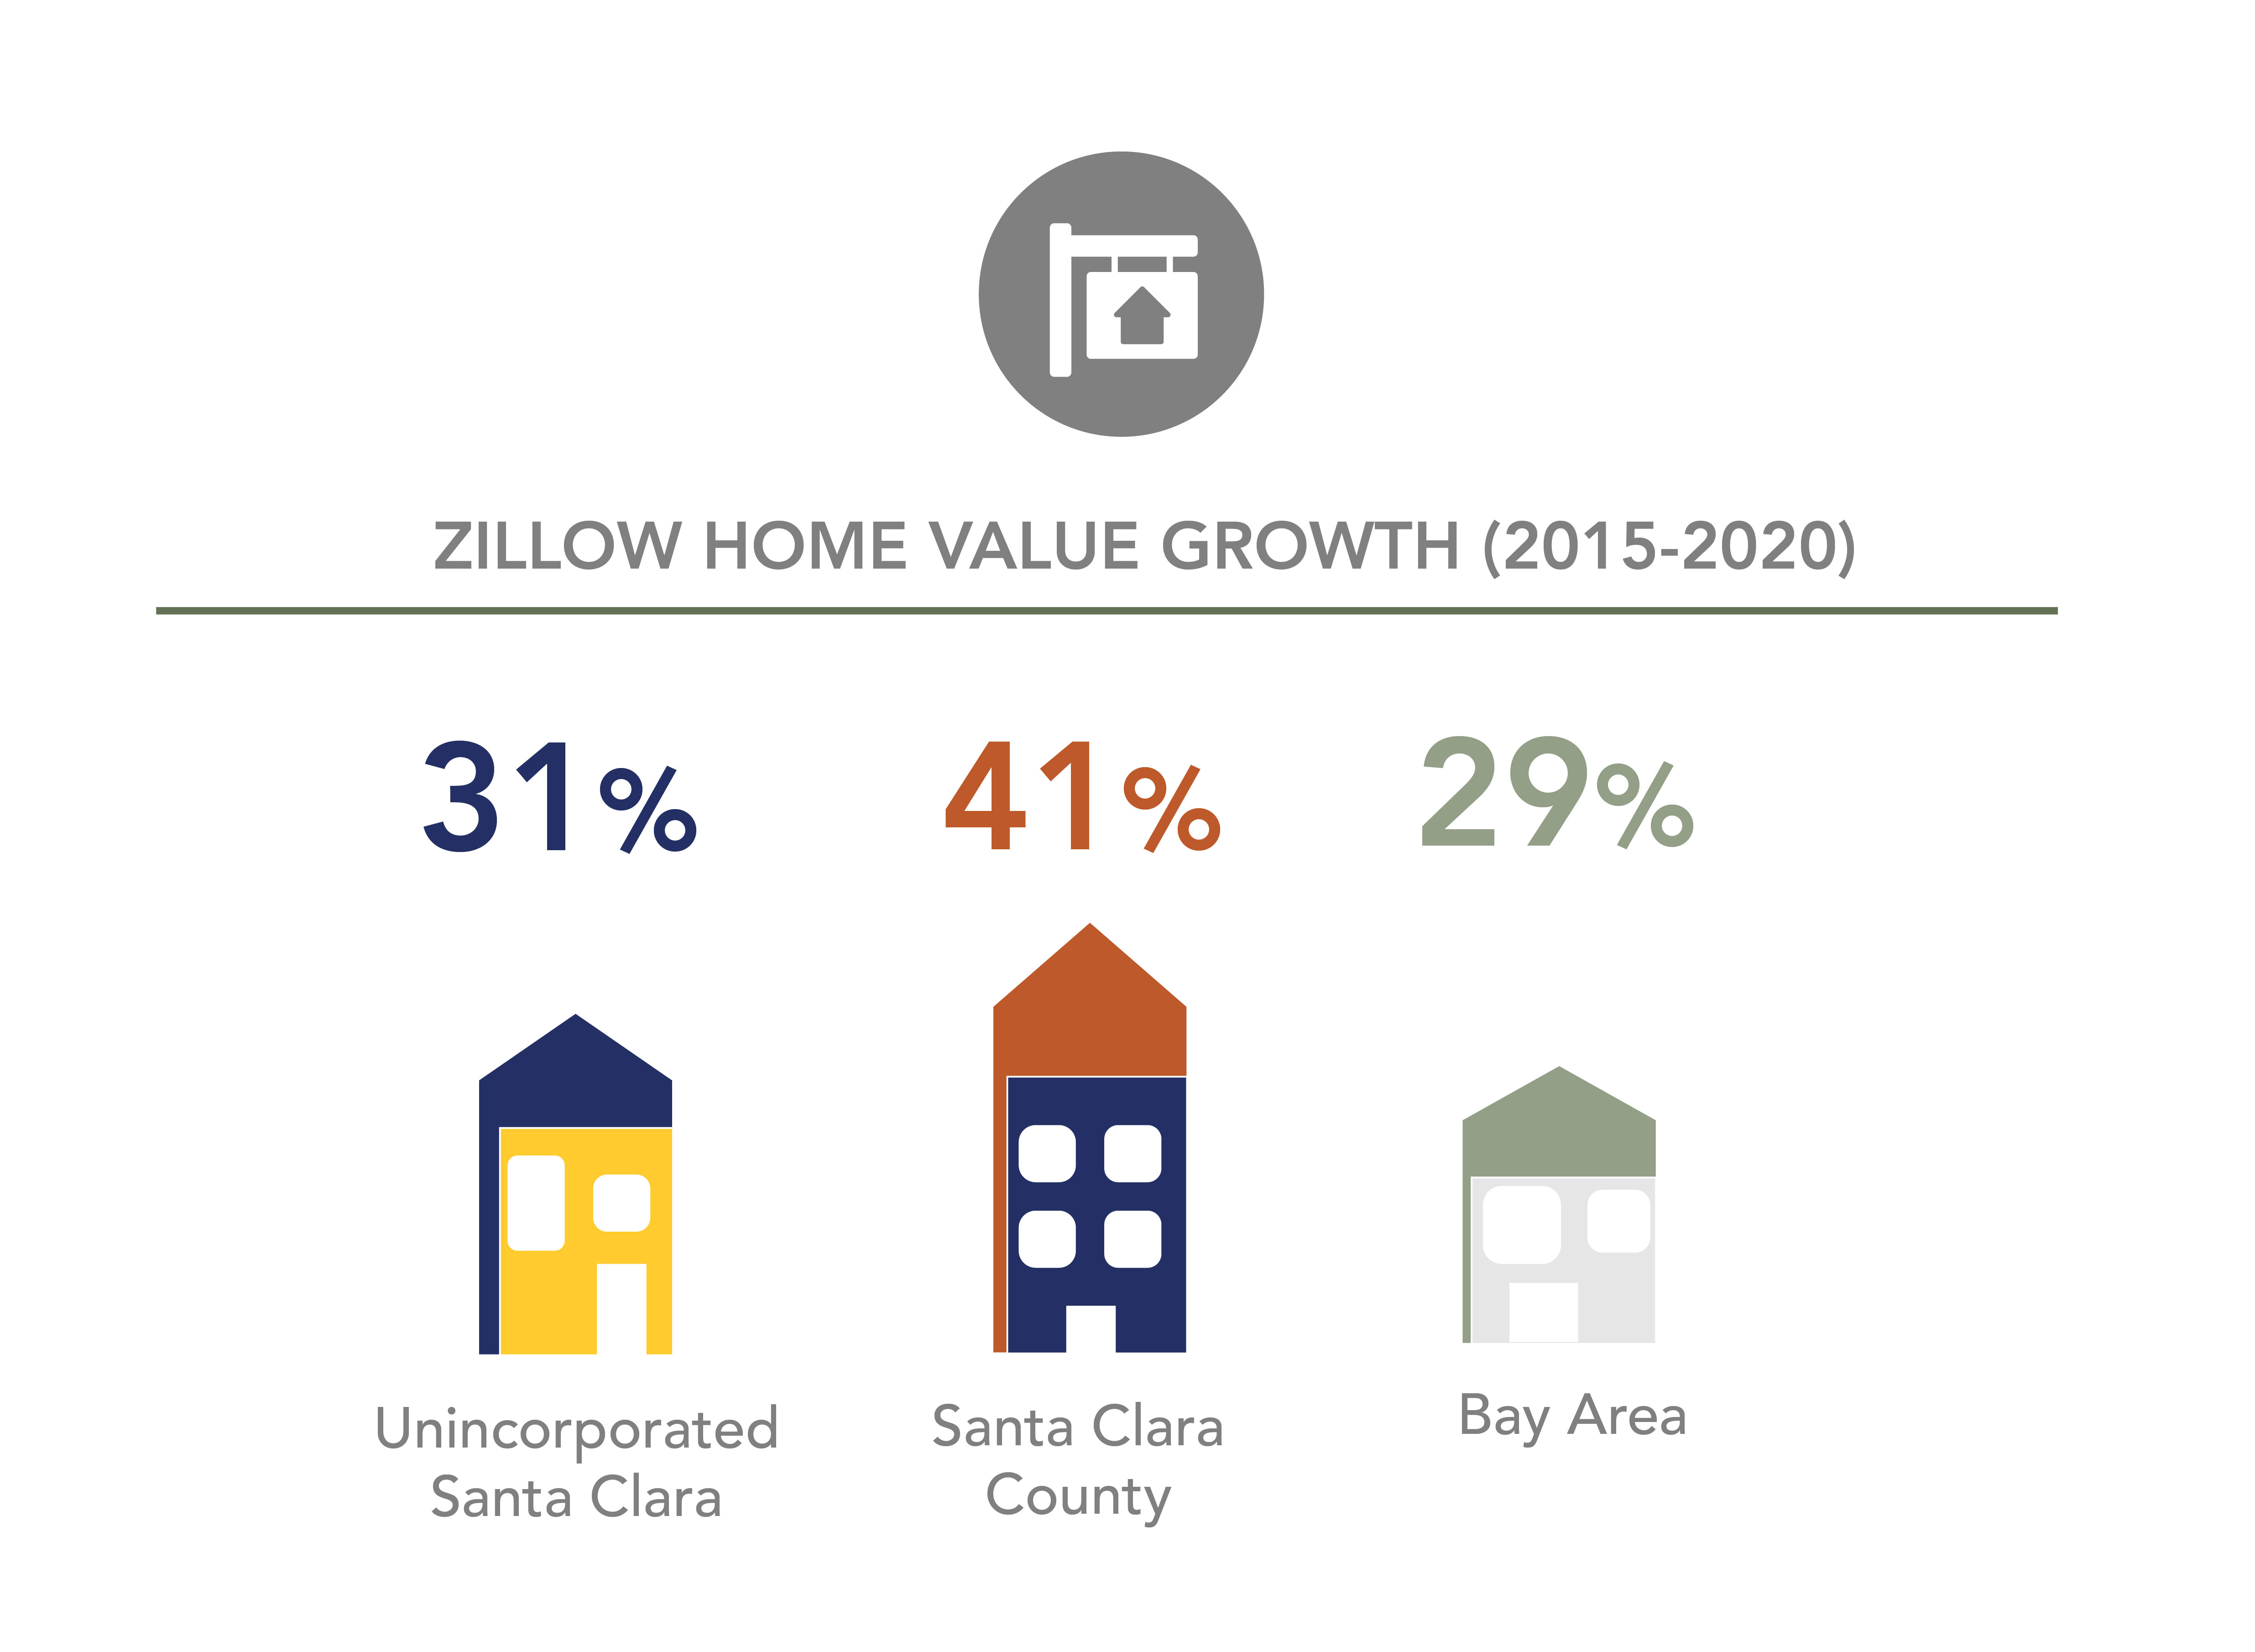 The value of homes has grown in Unincorporated Santa Clara by 31%, Santa Clara County by 41% and 29% in the Bay Area